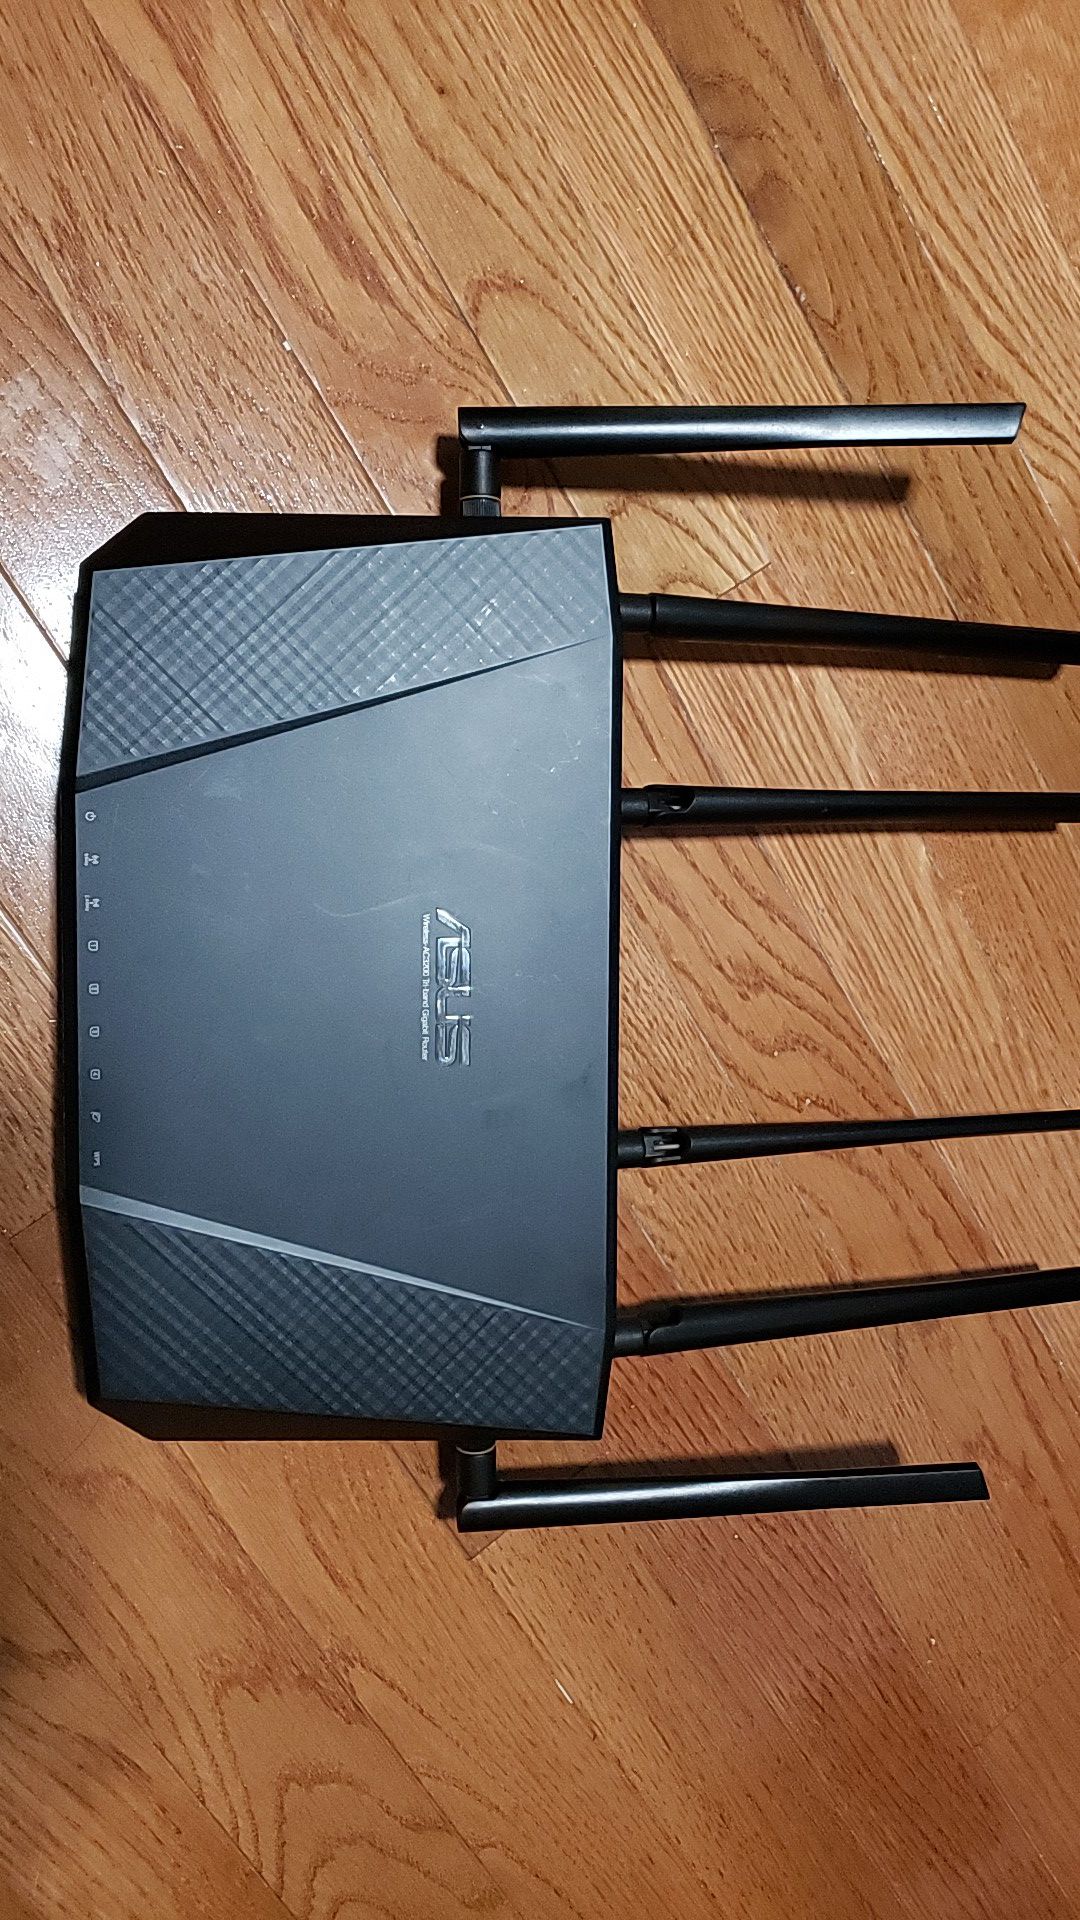 ASUS Wirless AC3200 Tri-Band Gigabyte Router